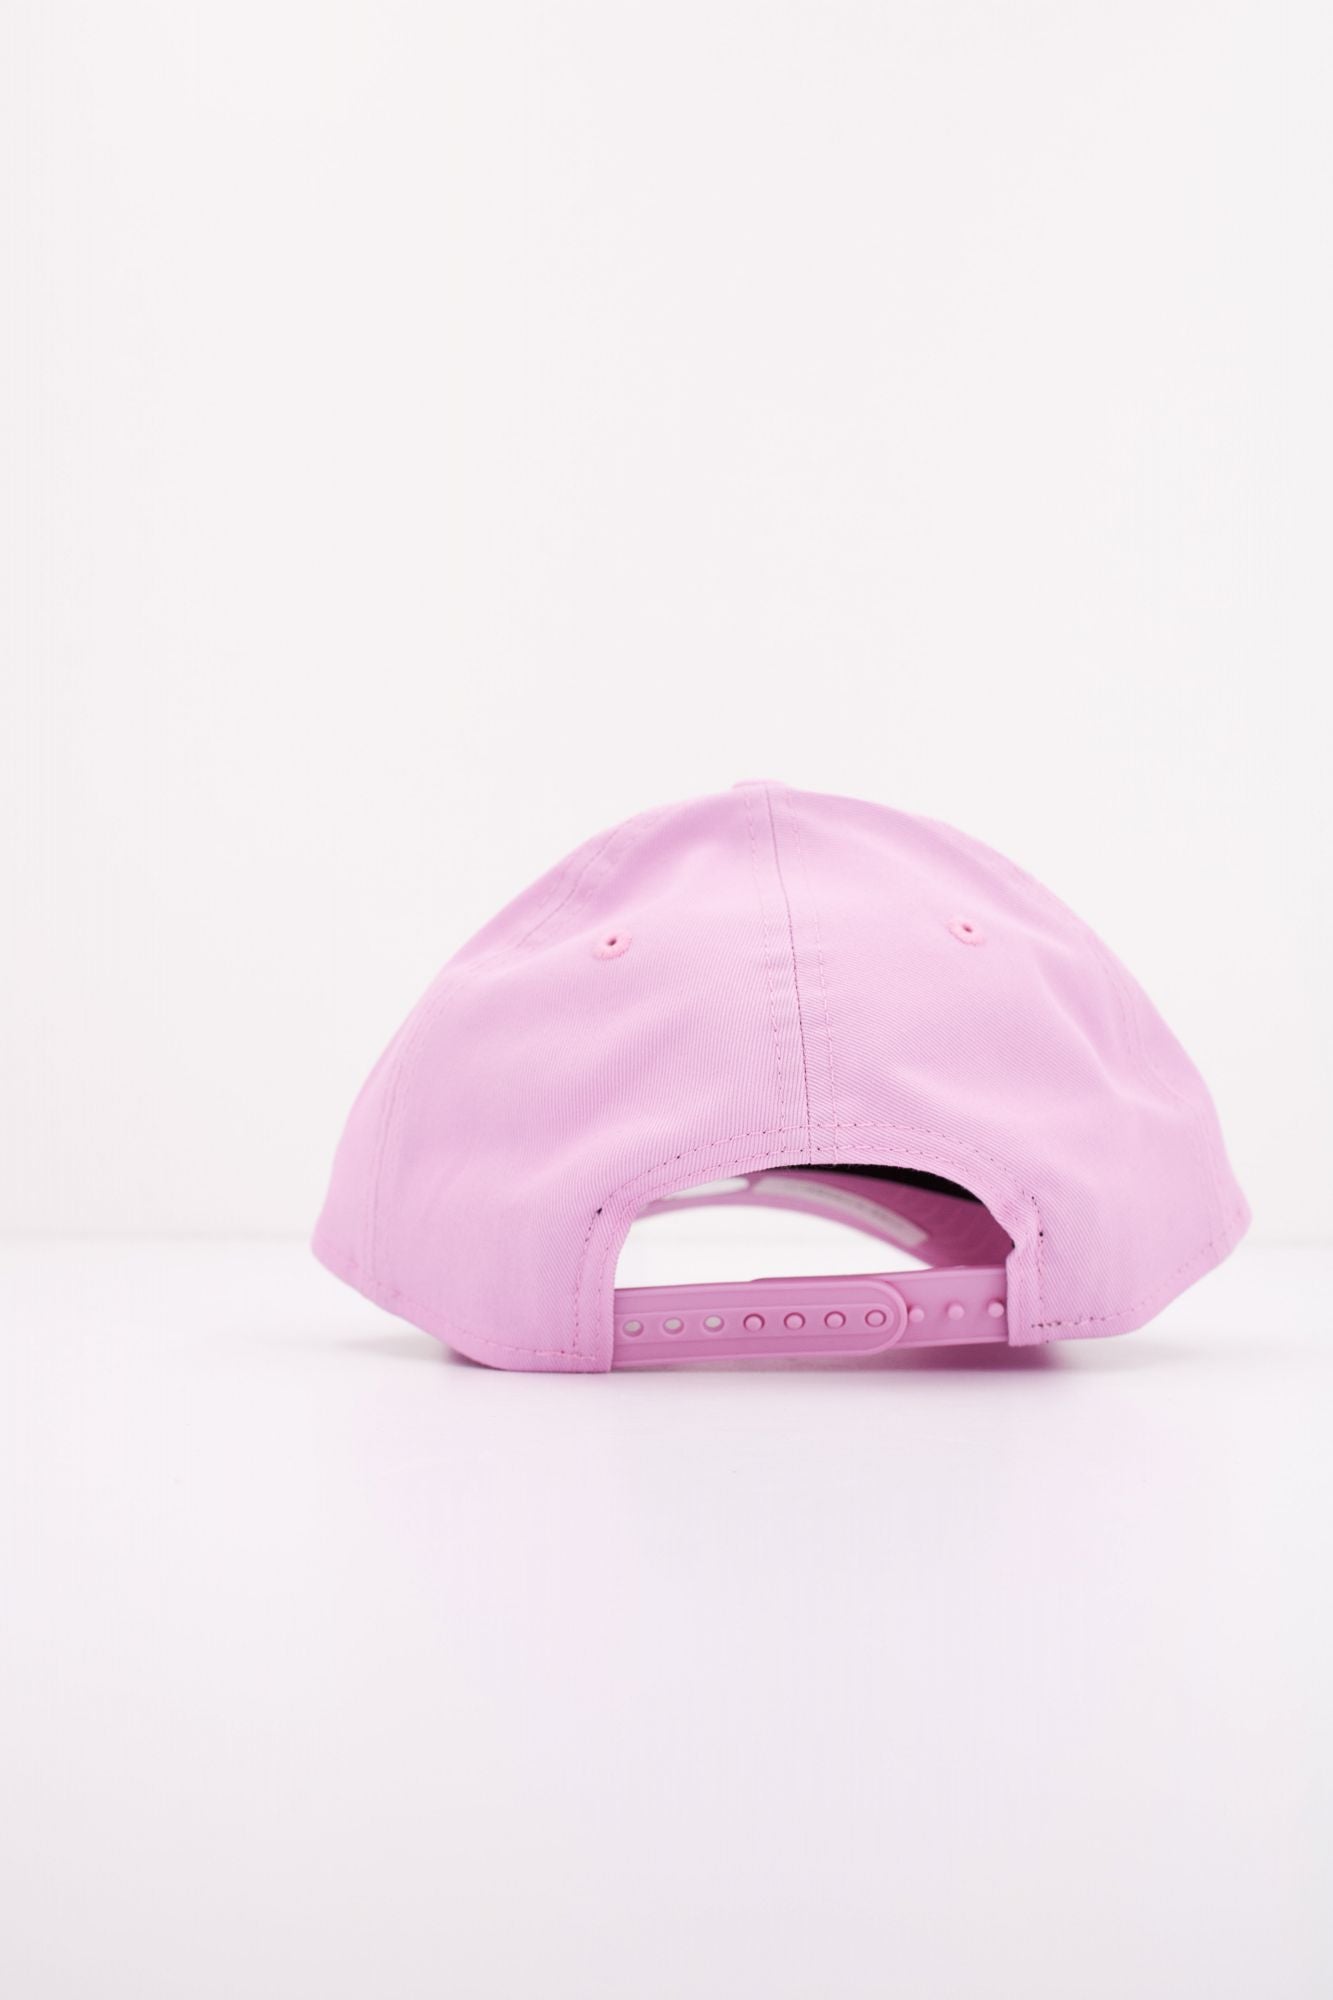 NEW ERA FLAWLESS 9FORTY en color ROSA (3)